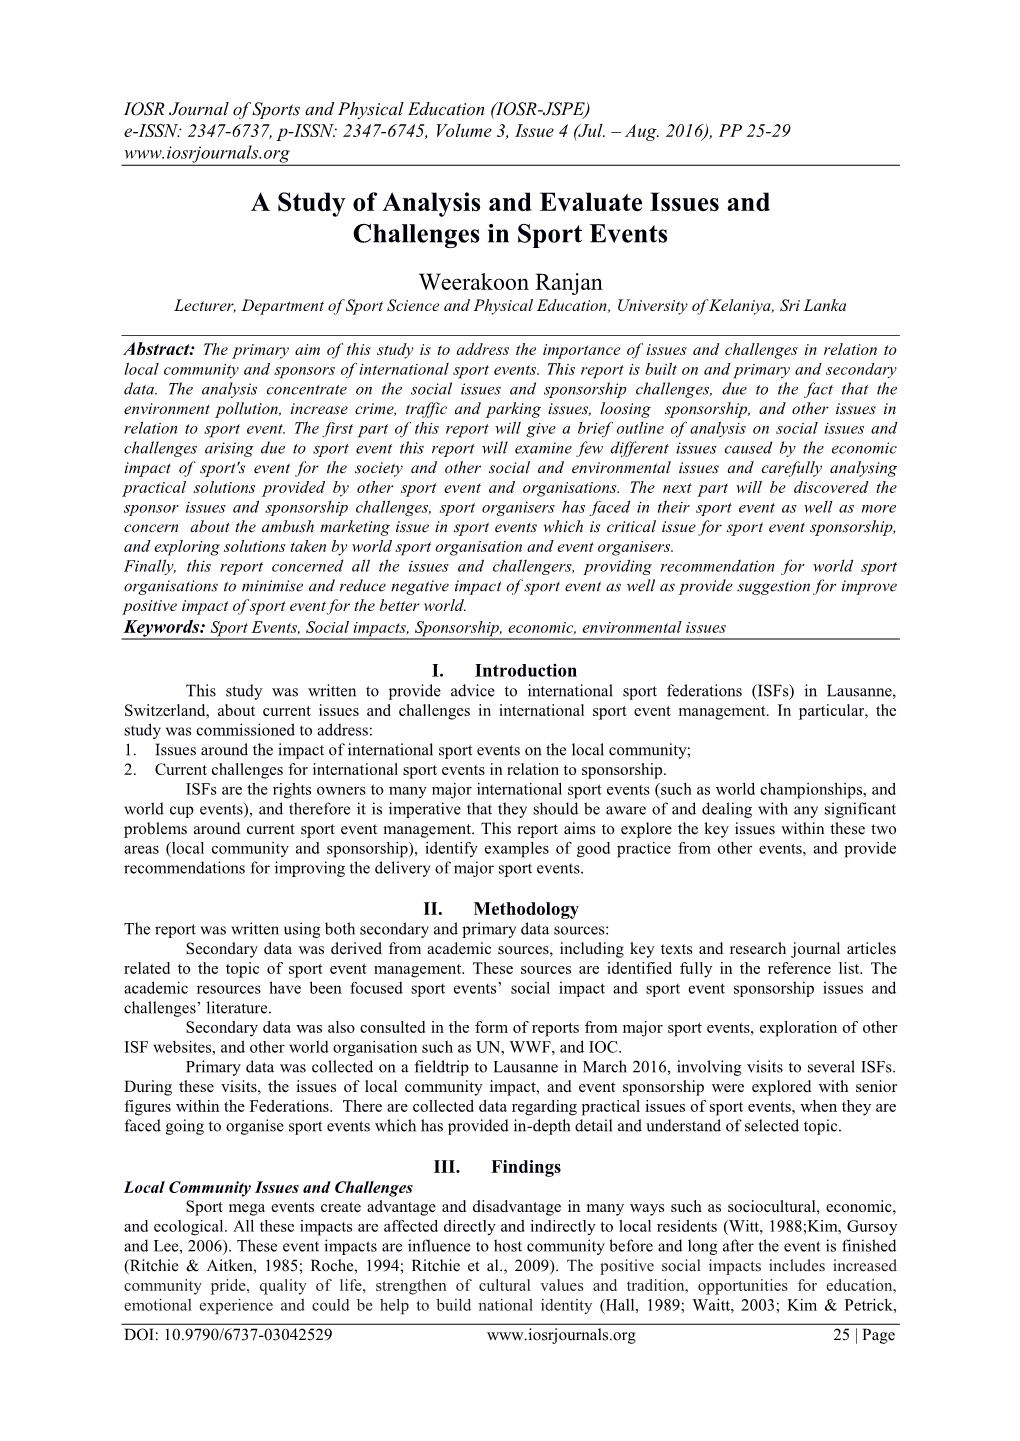 A Study of Analysis and Evaluate Issues and Challenges in Sport Events